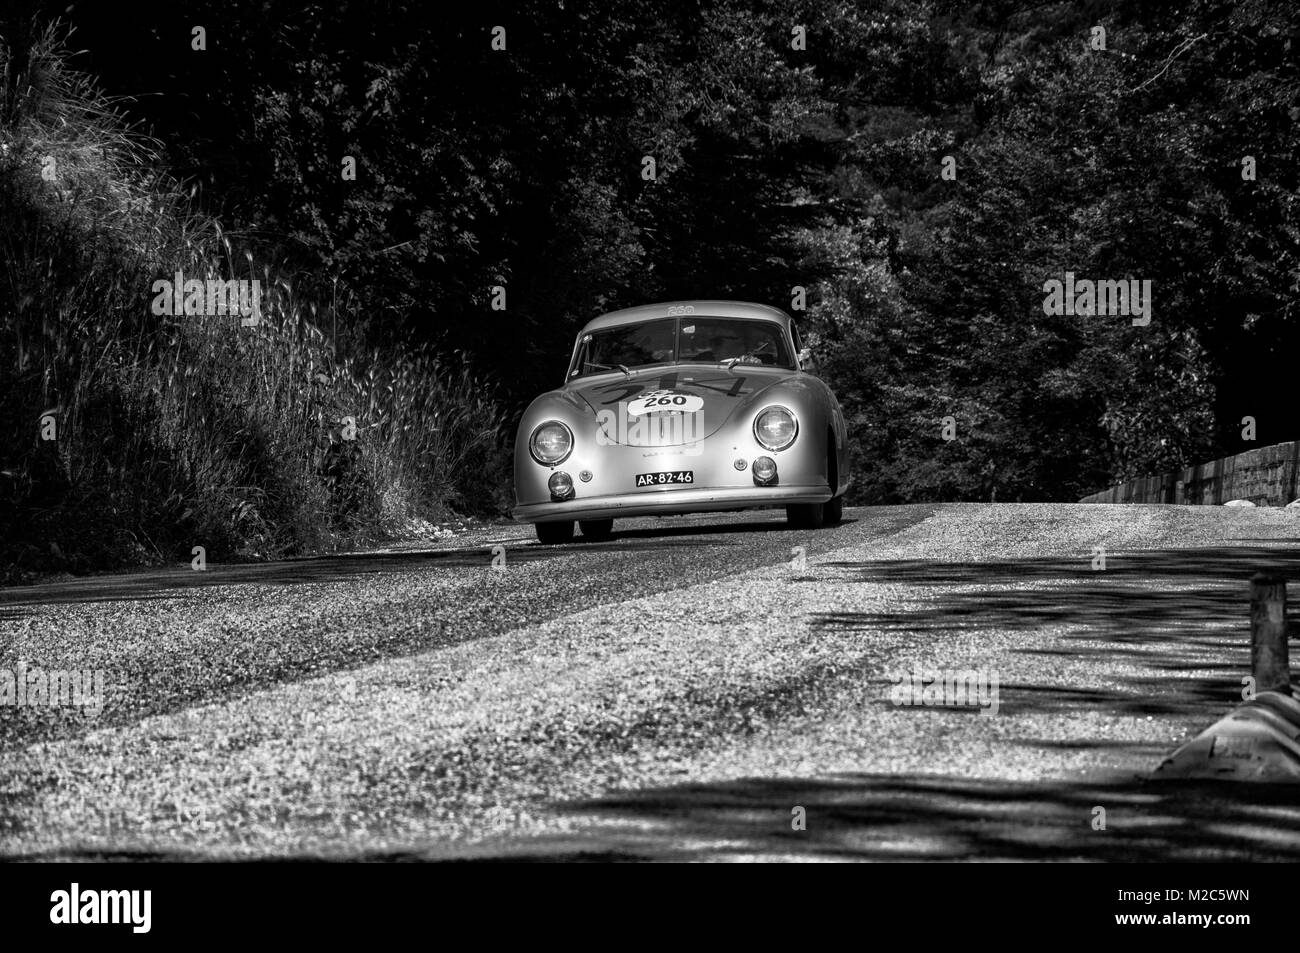 GOLA DEL FURLO, ITALY - MAY 19: PORSCHE 356 1500 SUPER 1952 an old racing car in rally Mille Miglia 2017 the famous italian historical race (1927-1957 Stock Photo